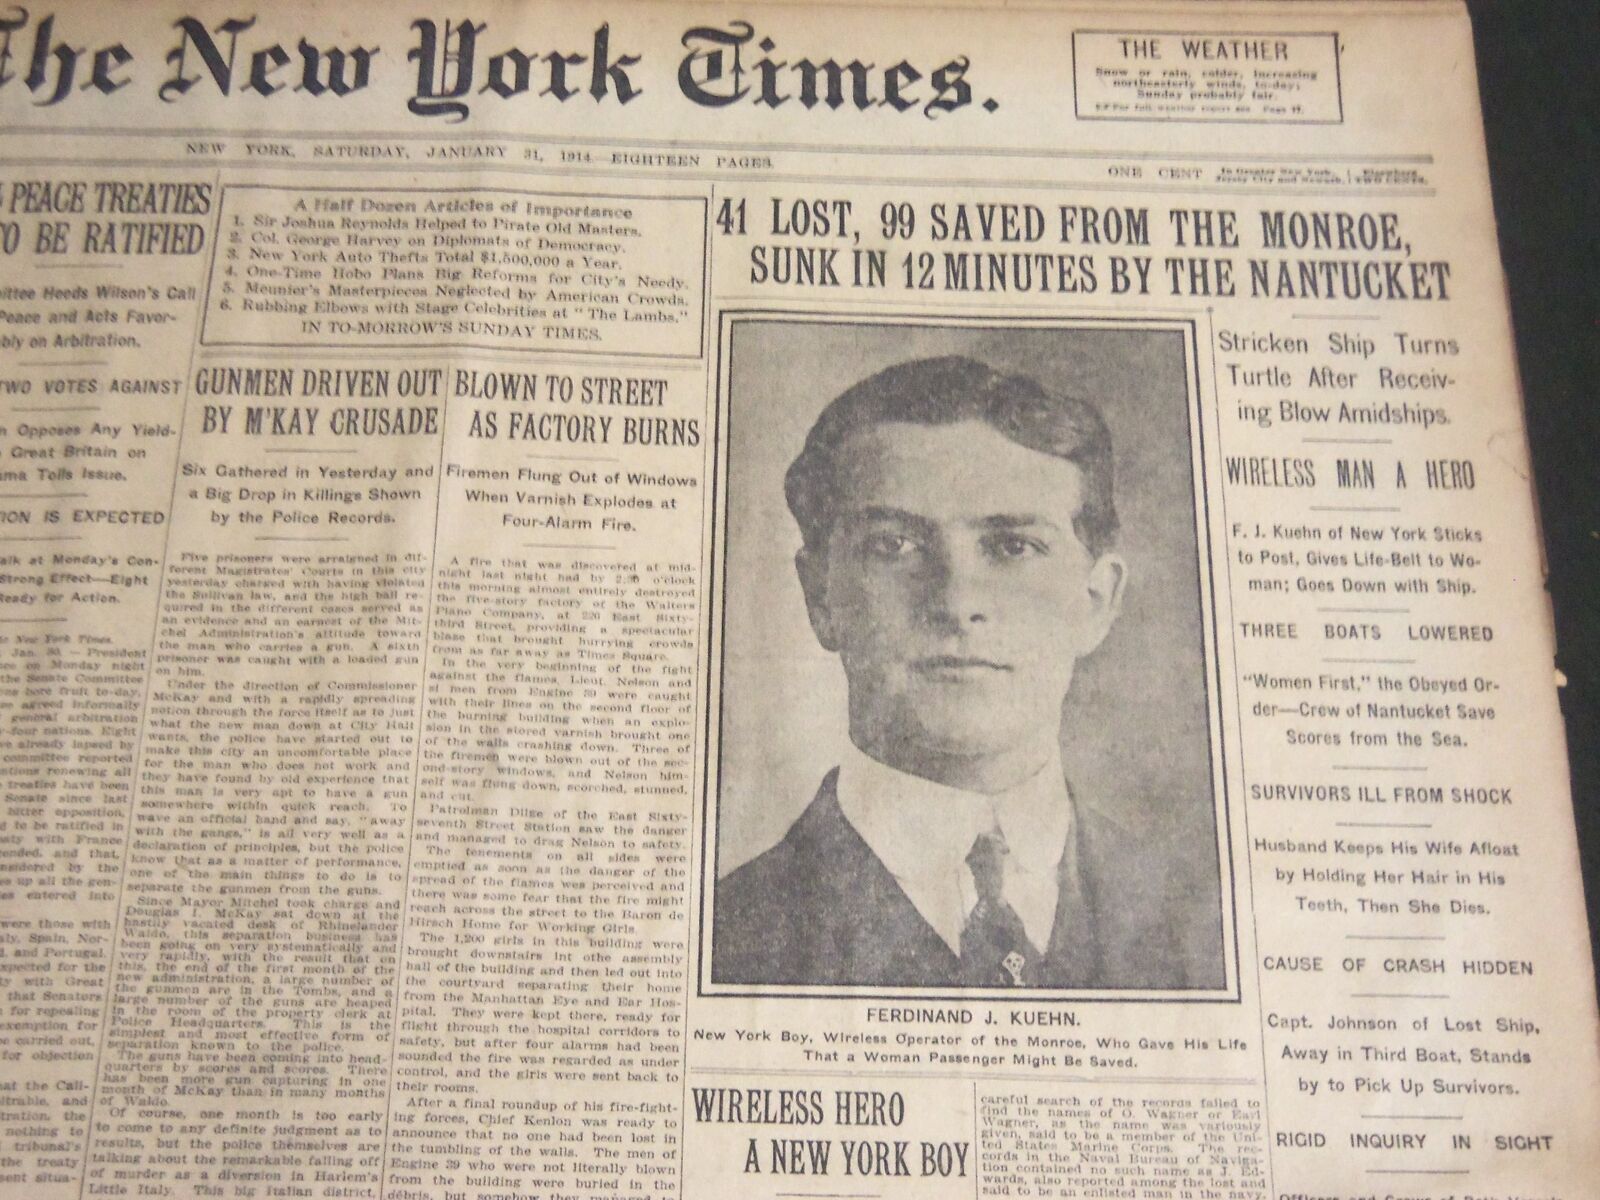 1914 JANUARY 31 NEW YORK TIMES - 41 LOST 99 SAVED FROM THE MONROE - NT 6656